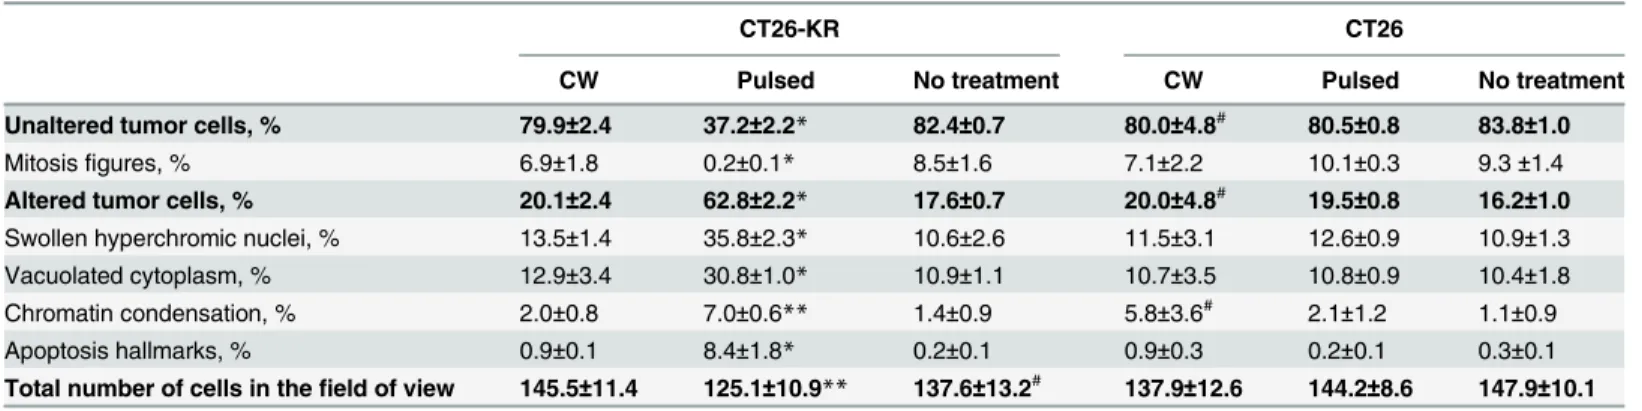 Table 2. Quantification of the cellular disorders induced by PDT with KR.